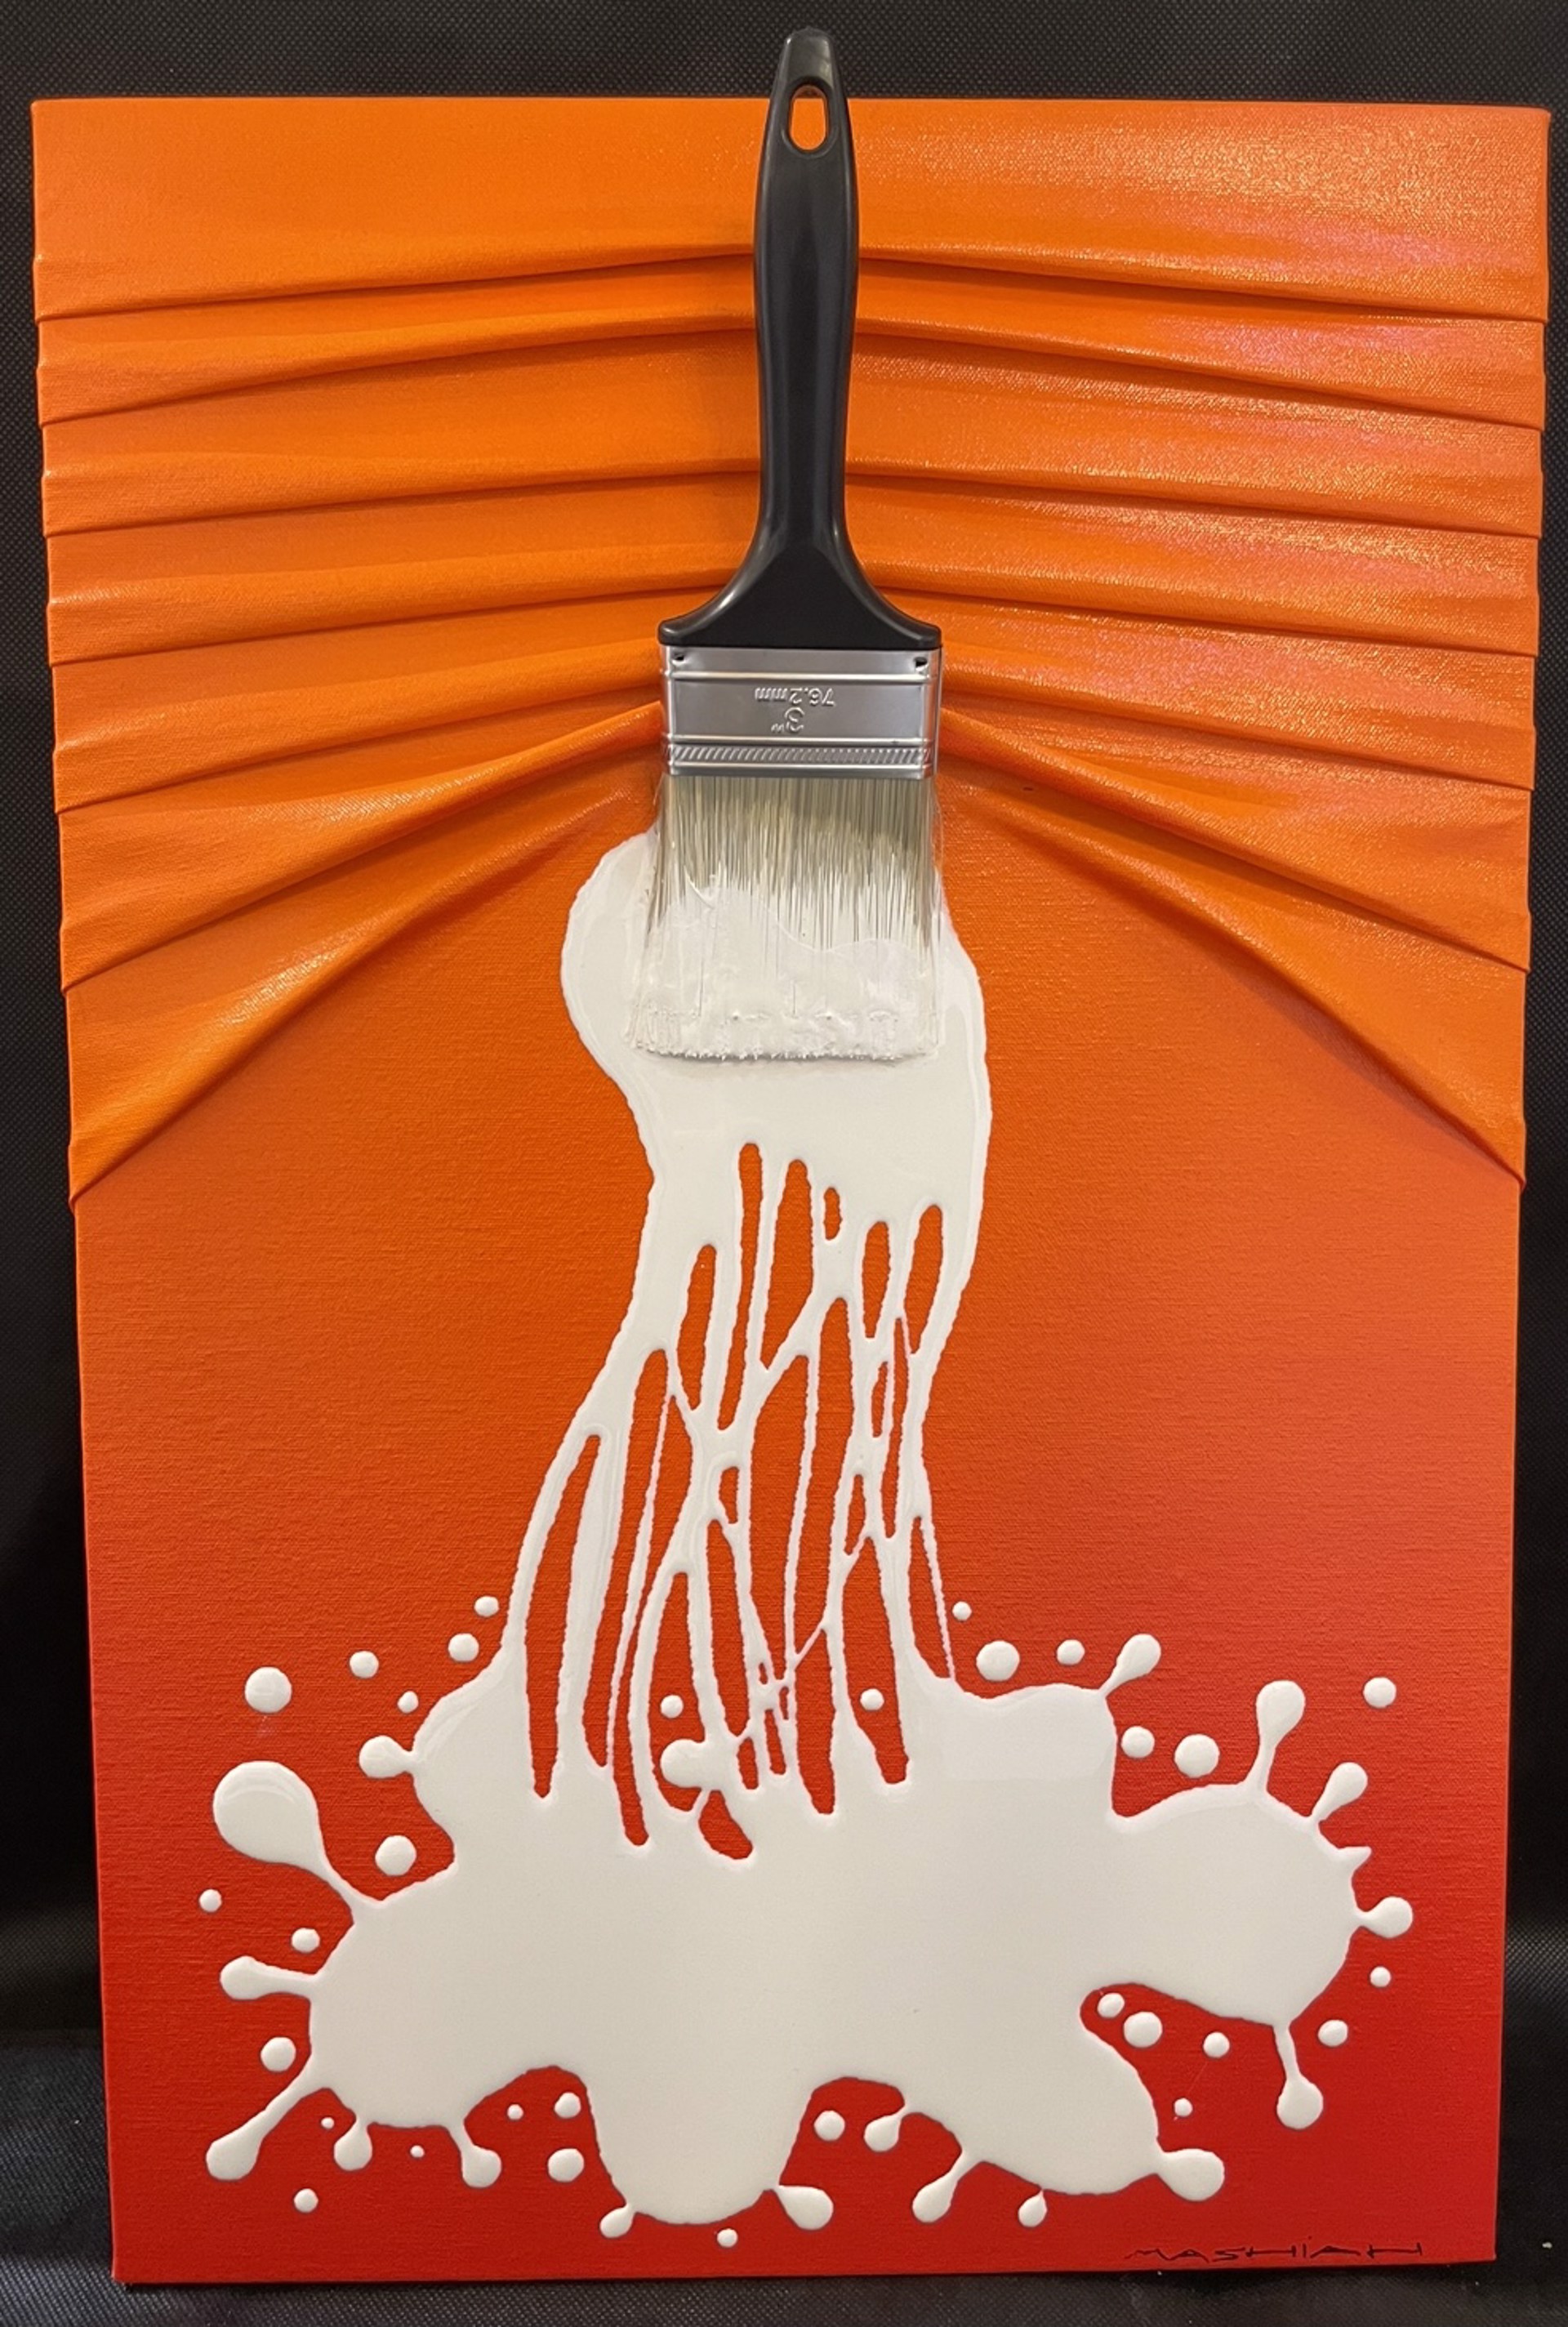 White Splash on the Orange Canvas by Brushes and Rollers "Let's Paint" by Efi Mashiah